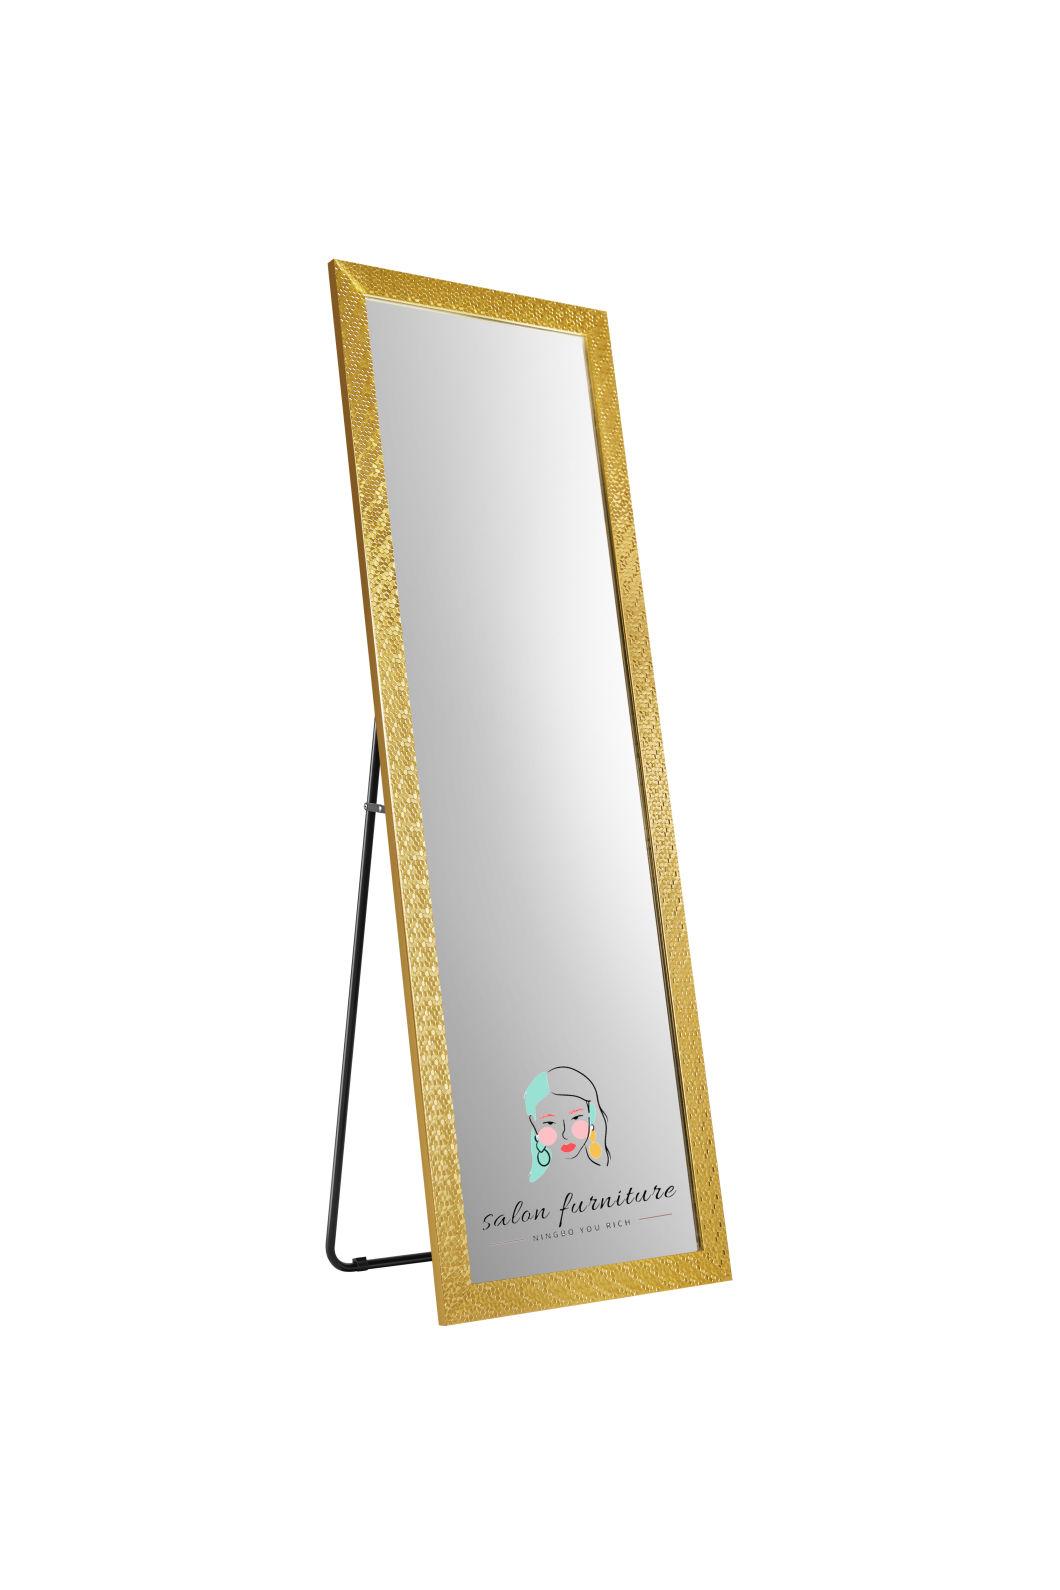 Hair Dressing Salon Mirror with Silver Frame Full Body Mirror Commercial Furniture